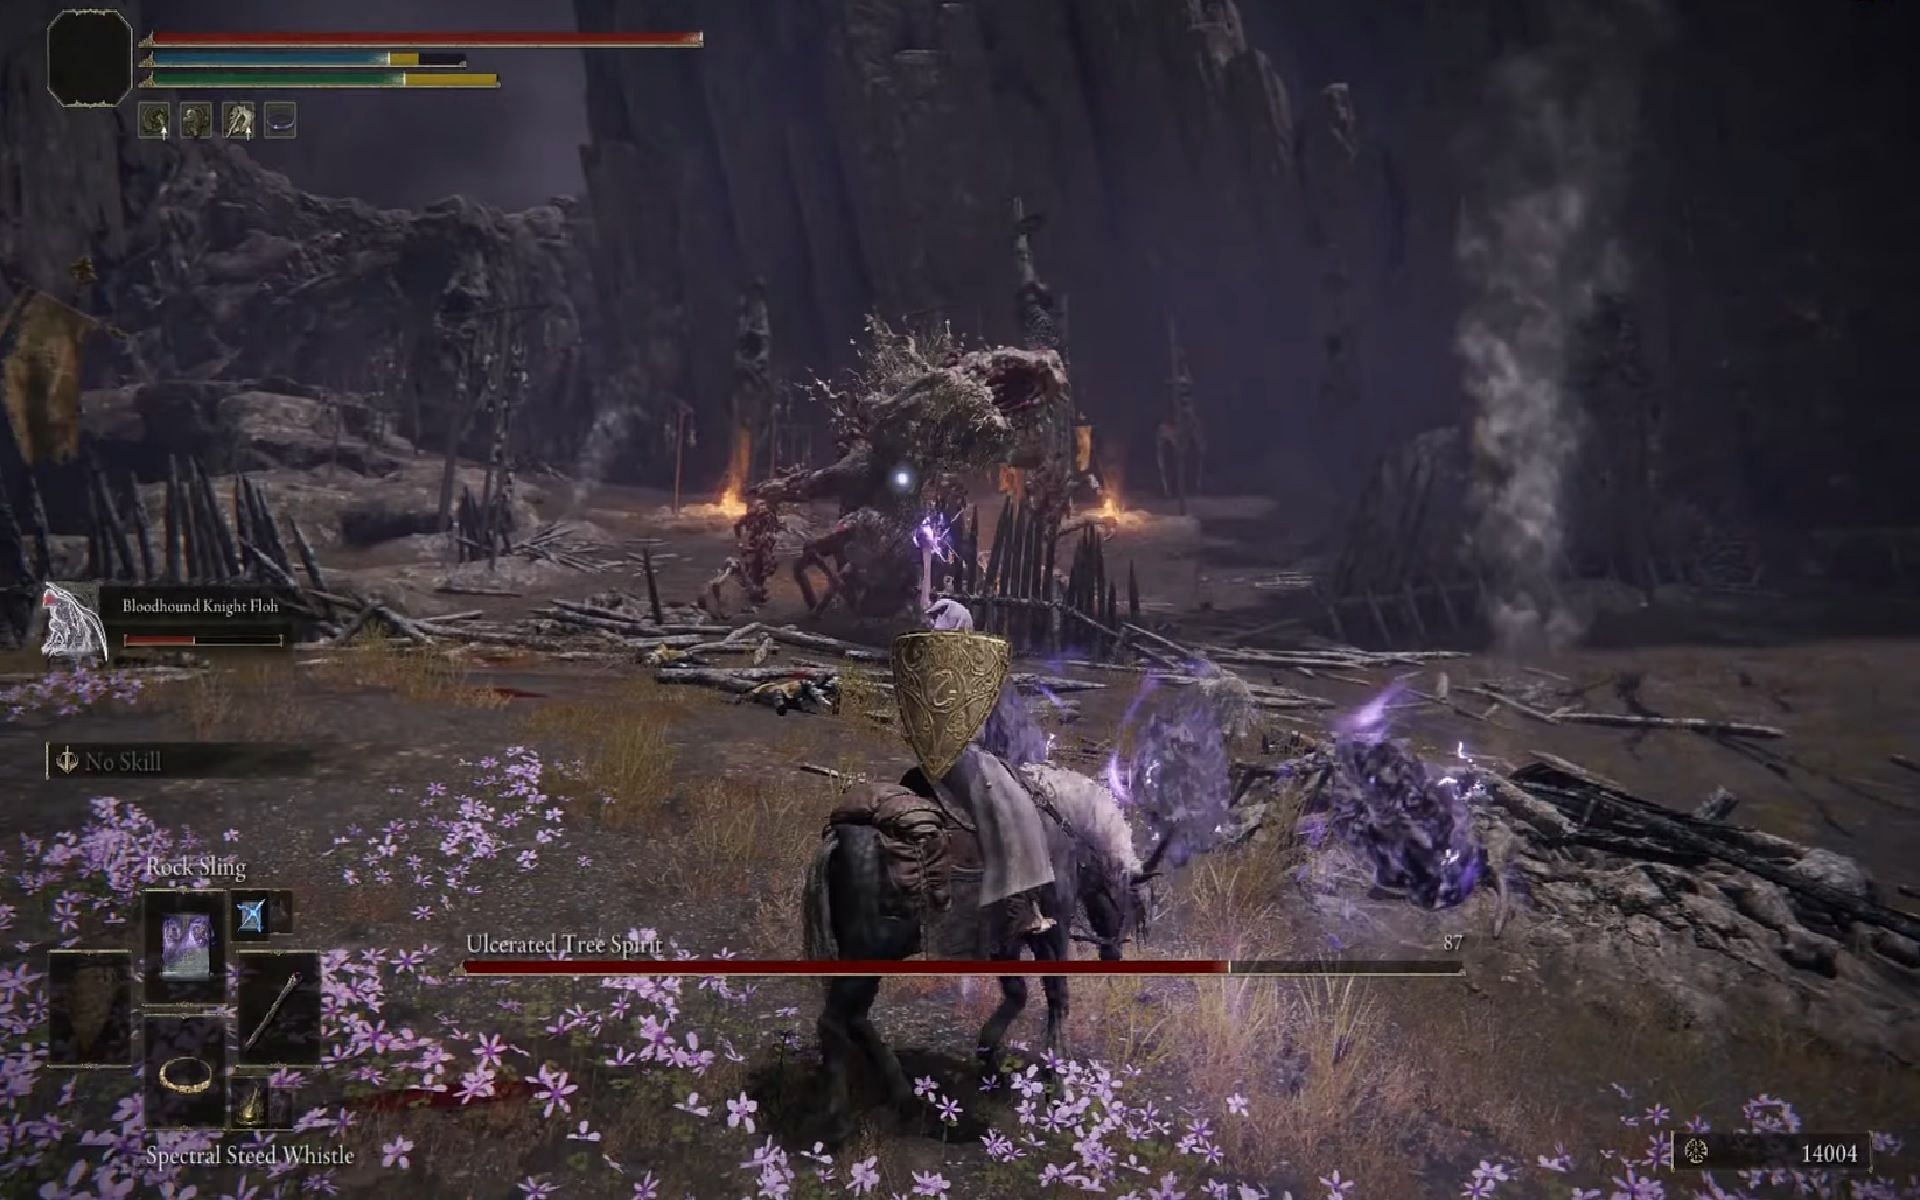 A player fighting the Ulcerated Tree Spirit in Elden Ring (Image via Gaming Tornado/YouTube)